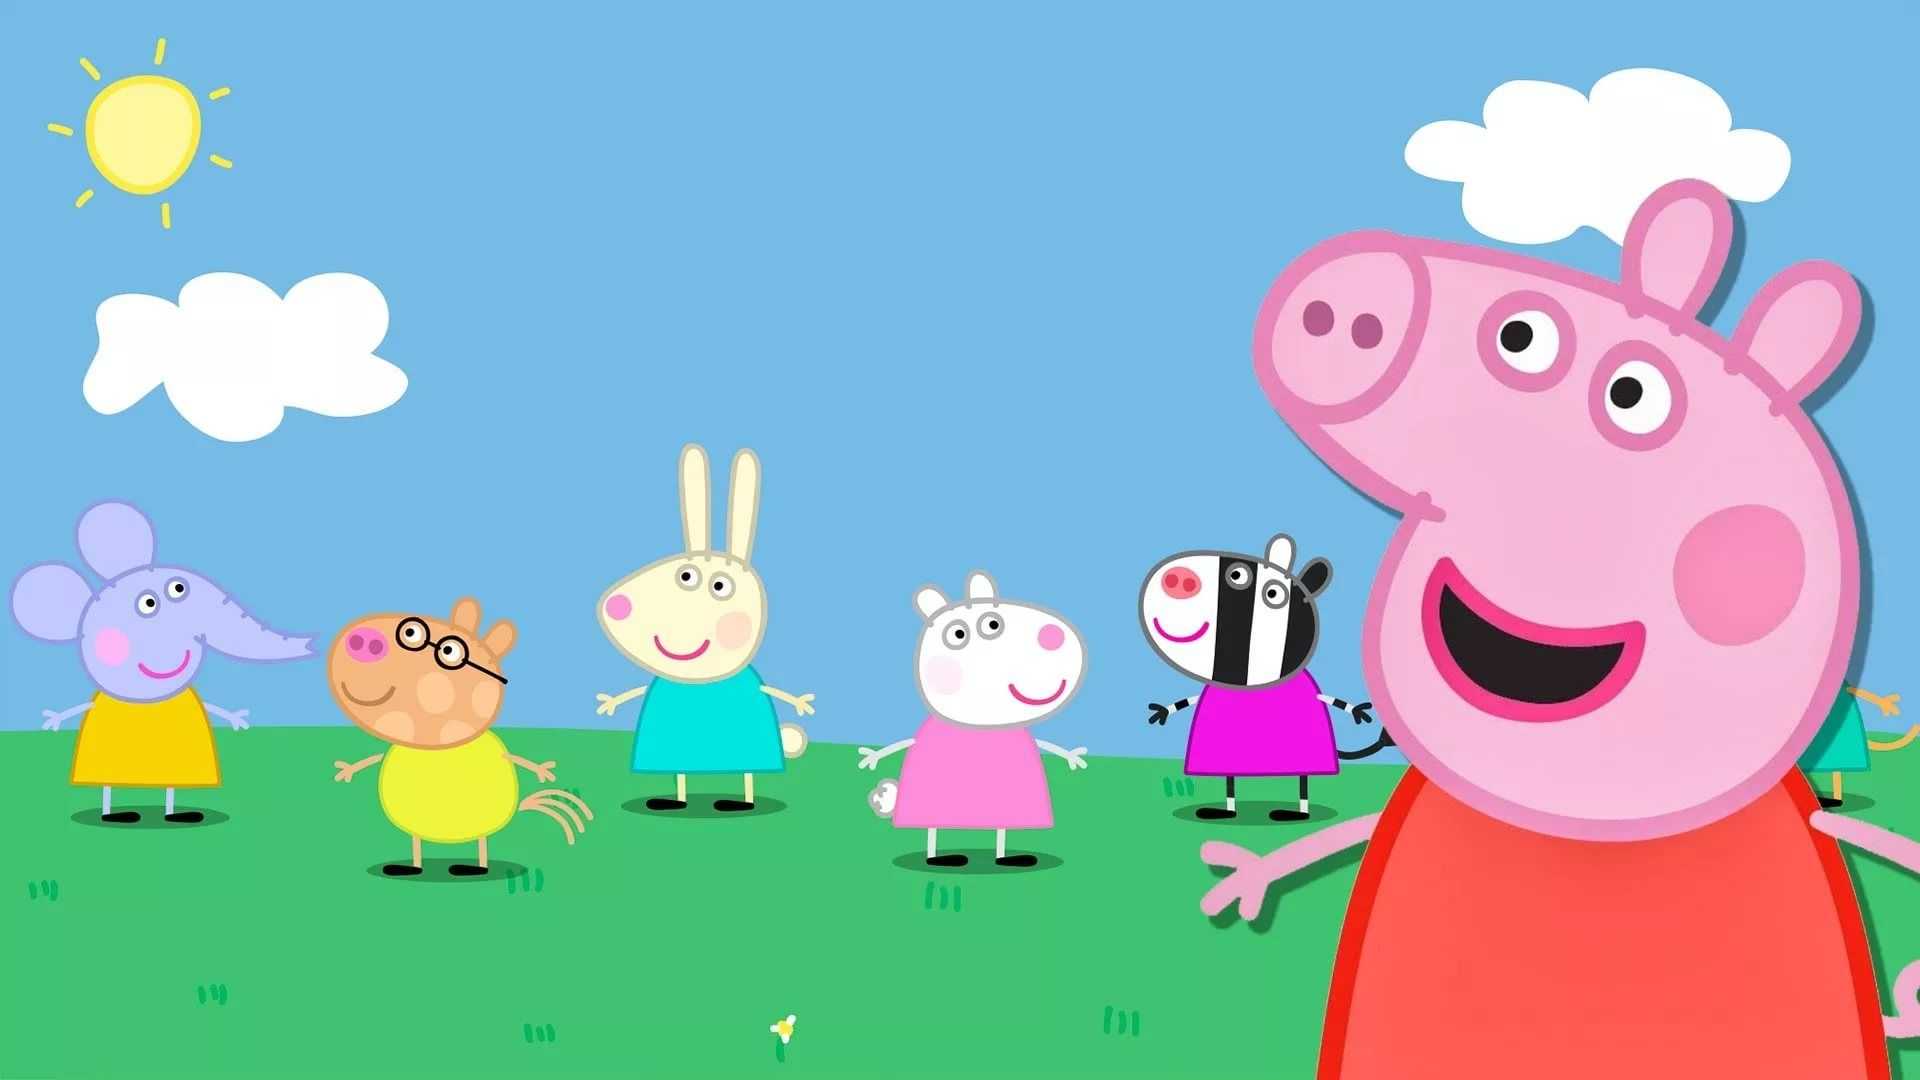 Peppa Pig House Wallpapers HD Background Peppa Pig House